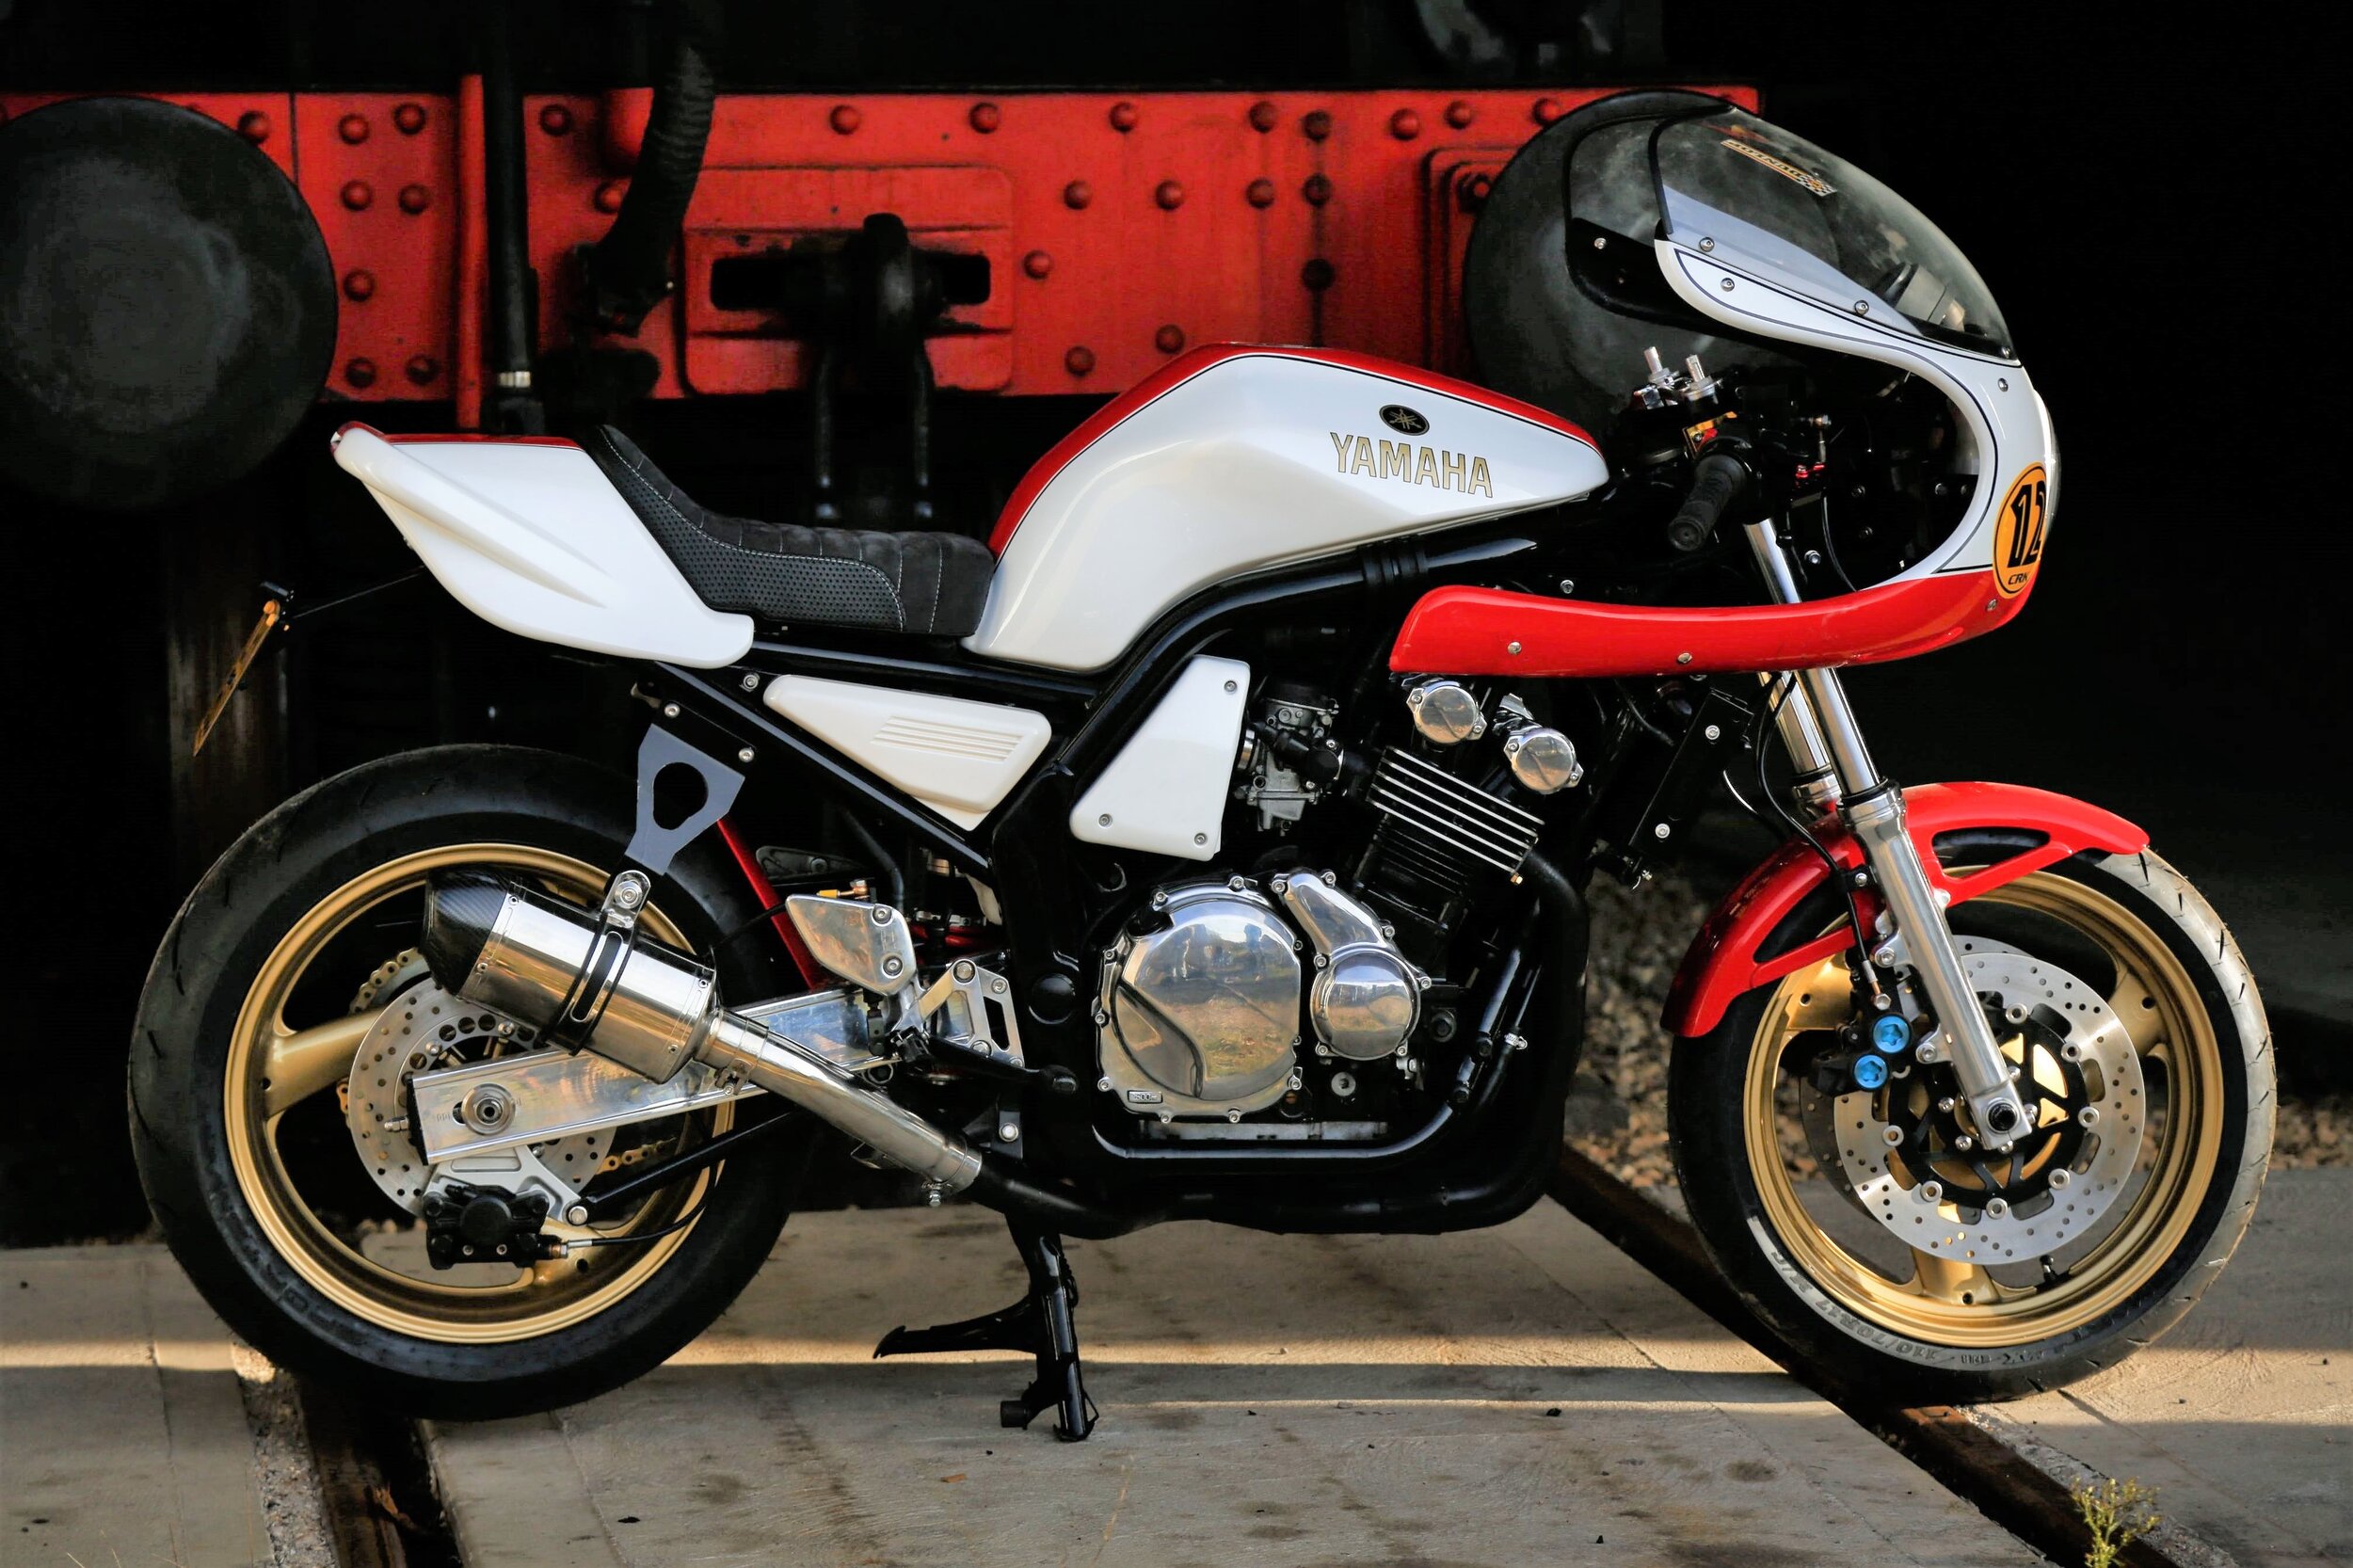 Kits, Parts And Accessories For Your Cafe Racer Motorcycle!